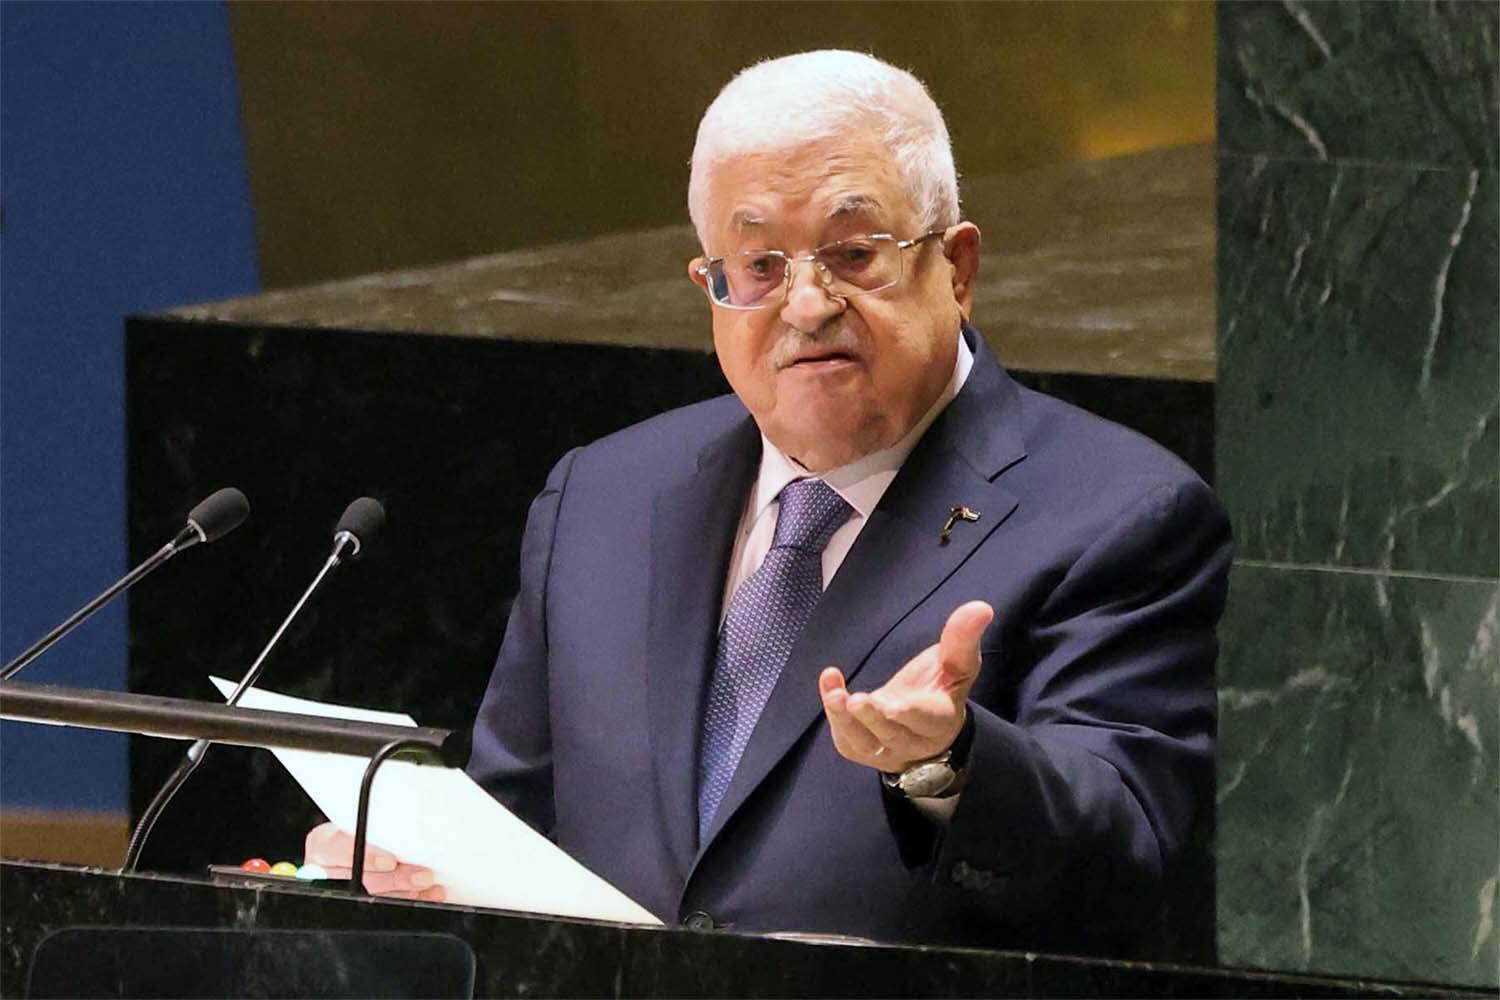 Abbas called on the UN to convene a conference to try to revive Israeli-Palestinian peace talks